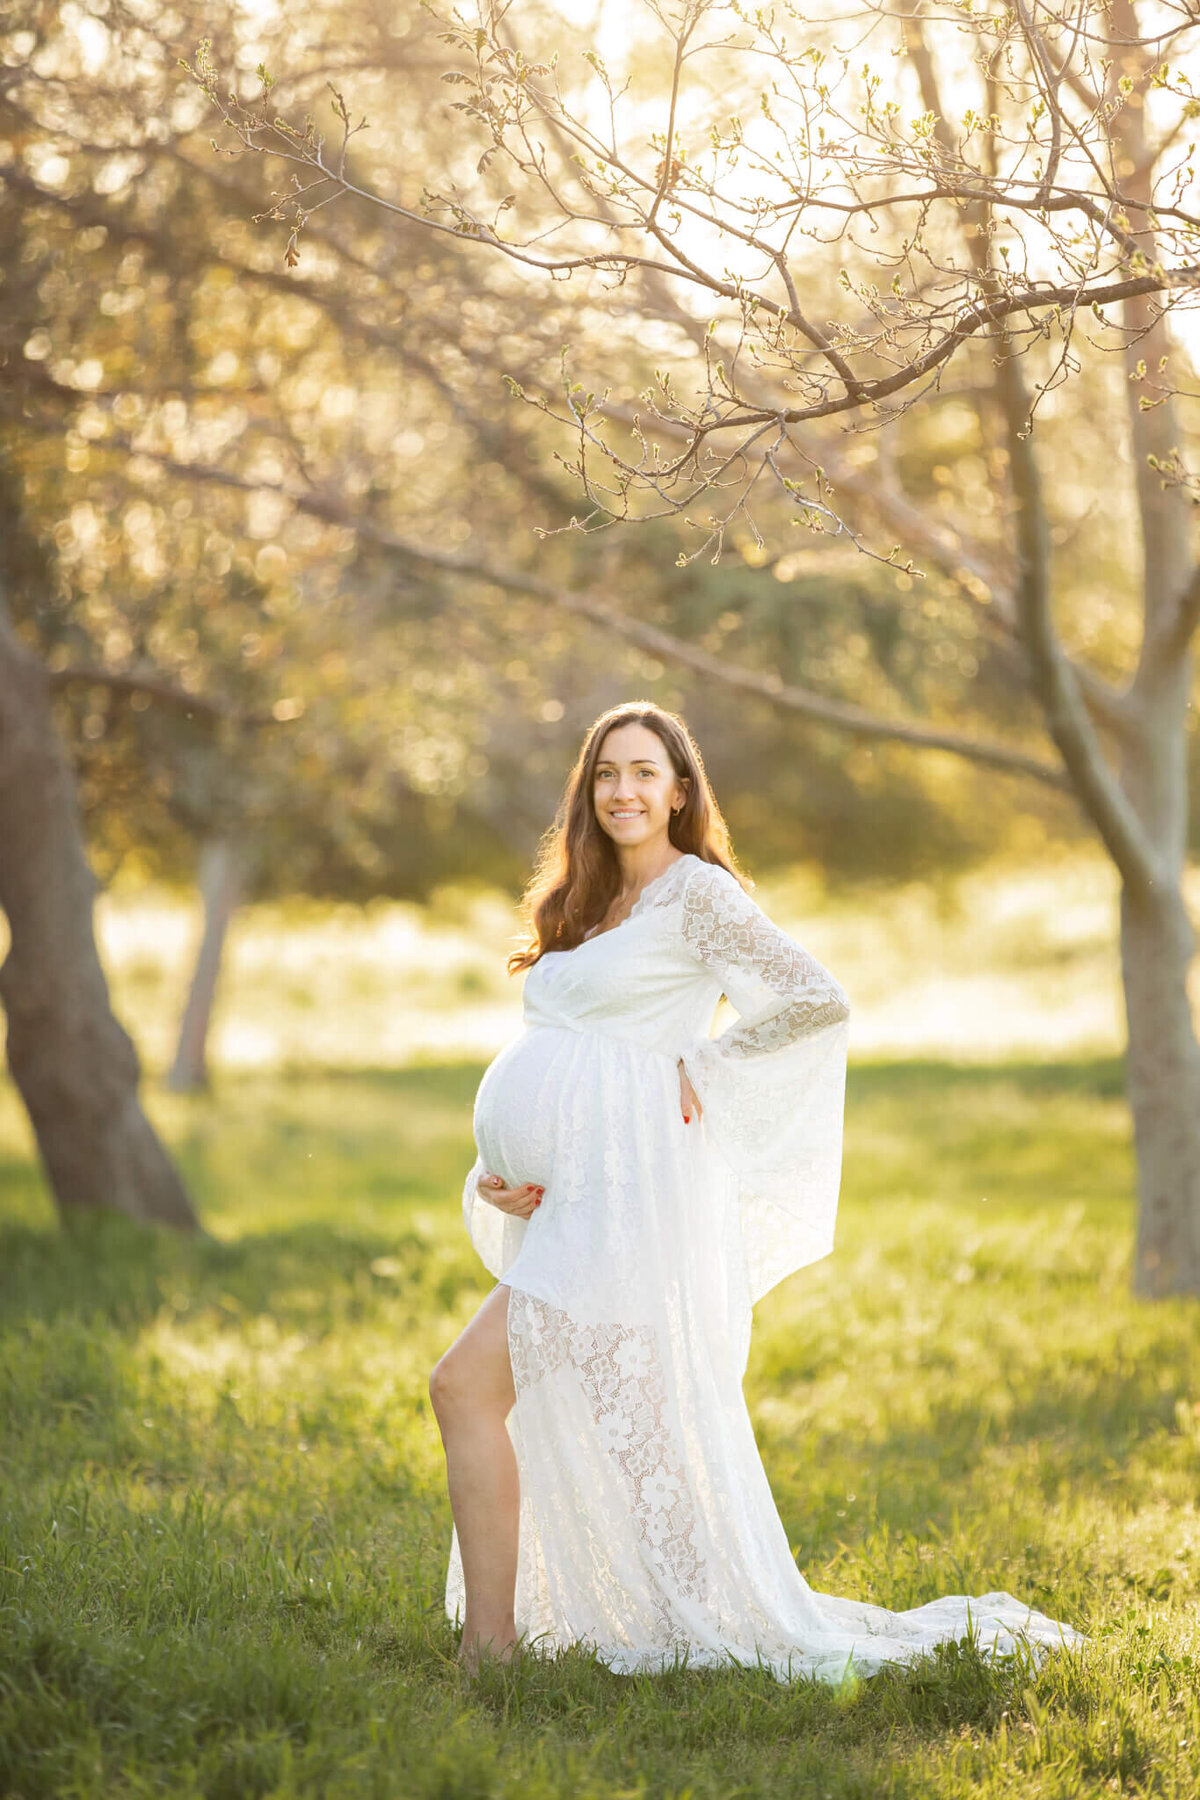 Maternity photoshoot image in Los Angeles by Maternity photographer ZZElsie Rose Photography